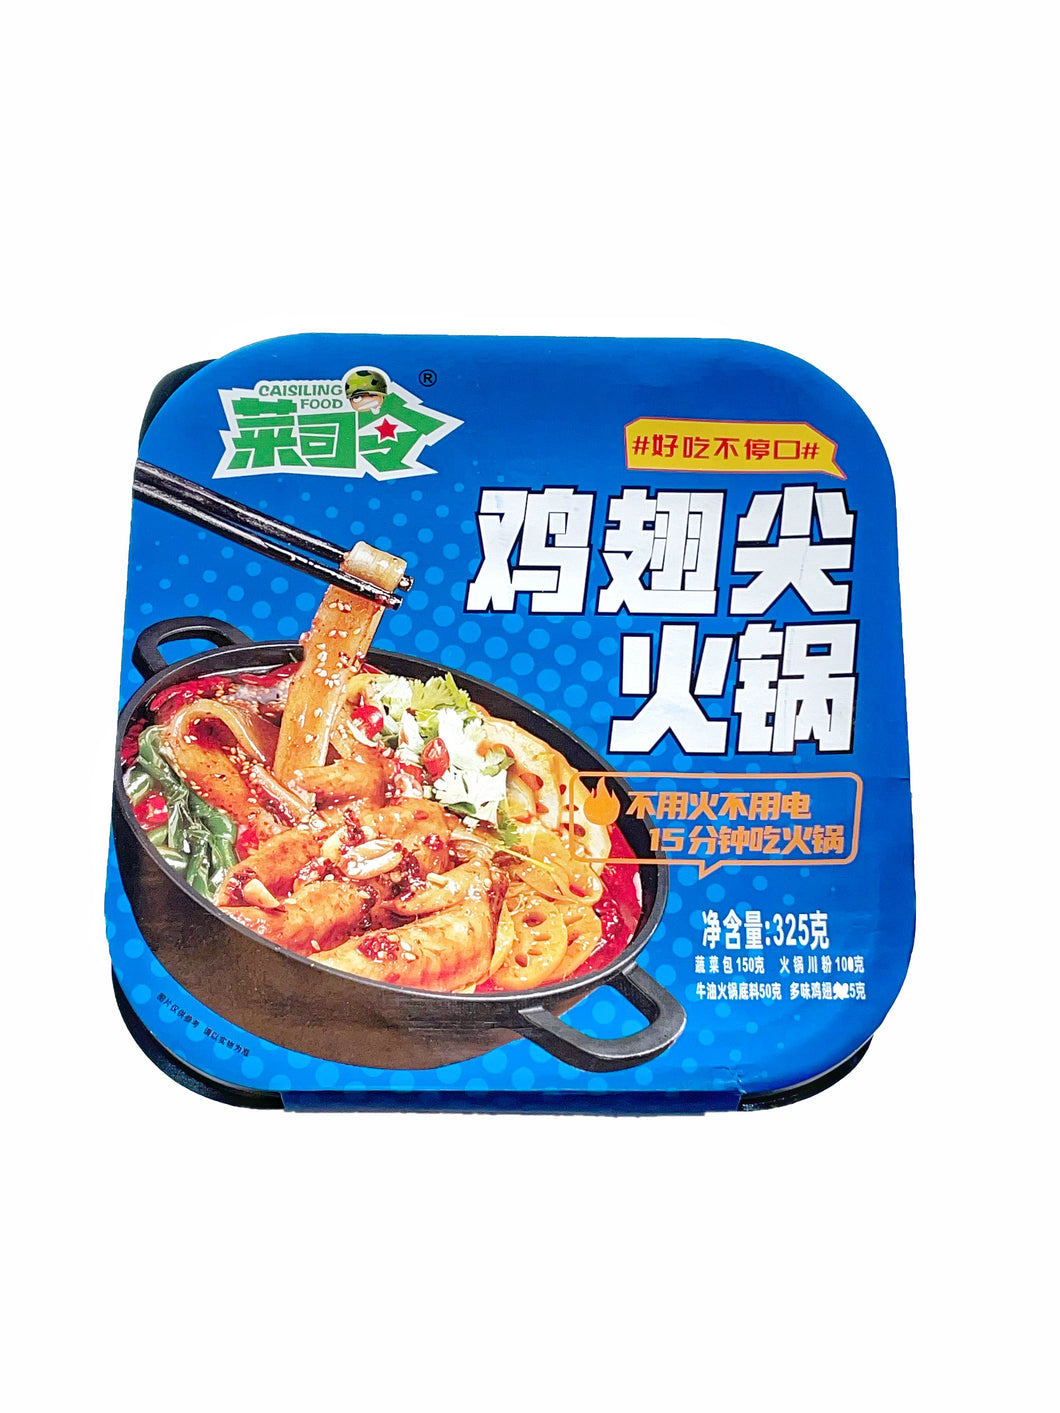 Caisiling Food Self Heating Hotpot - Chicken Wing Tip with Wide Vermicelli 325g <br> 菜司令自熱火鍋 - 雞翅尖火鍋